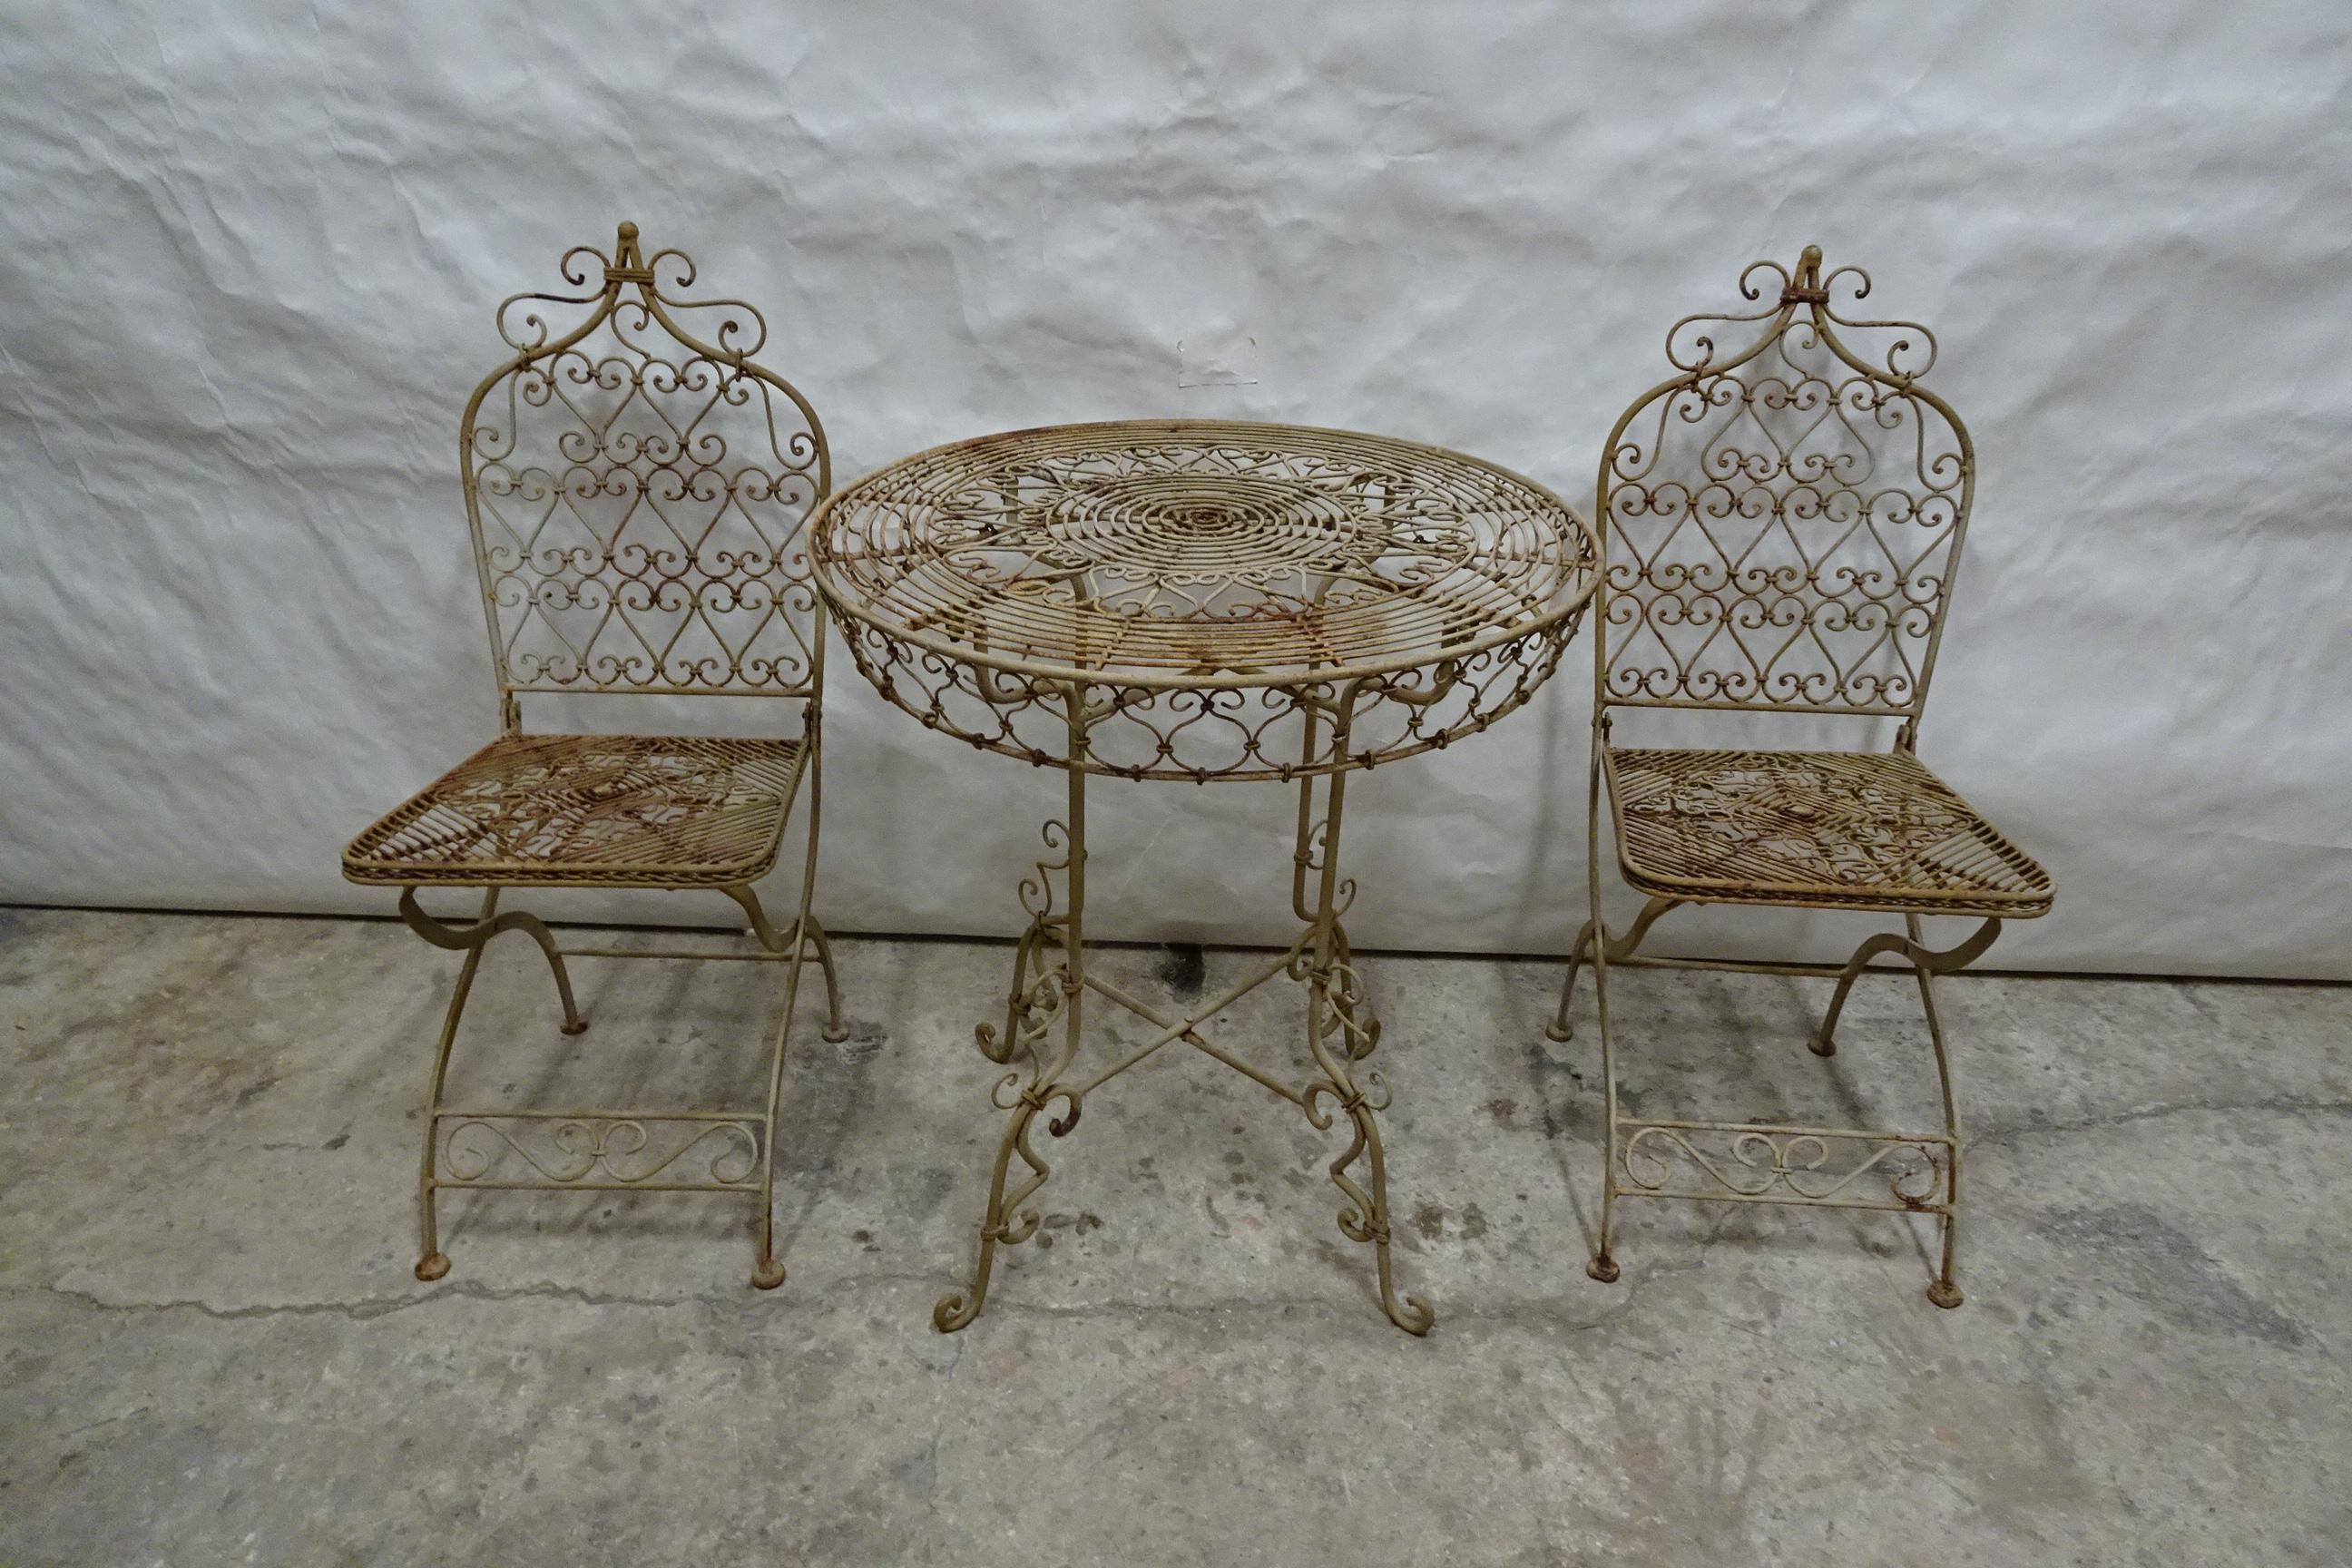 This is a Unique Wrought Iron Table + Chairs in original condition.